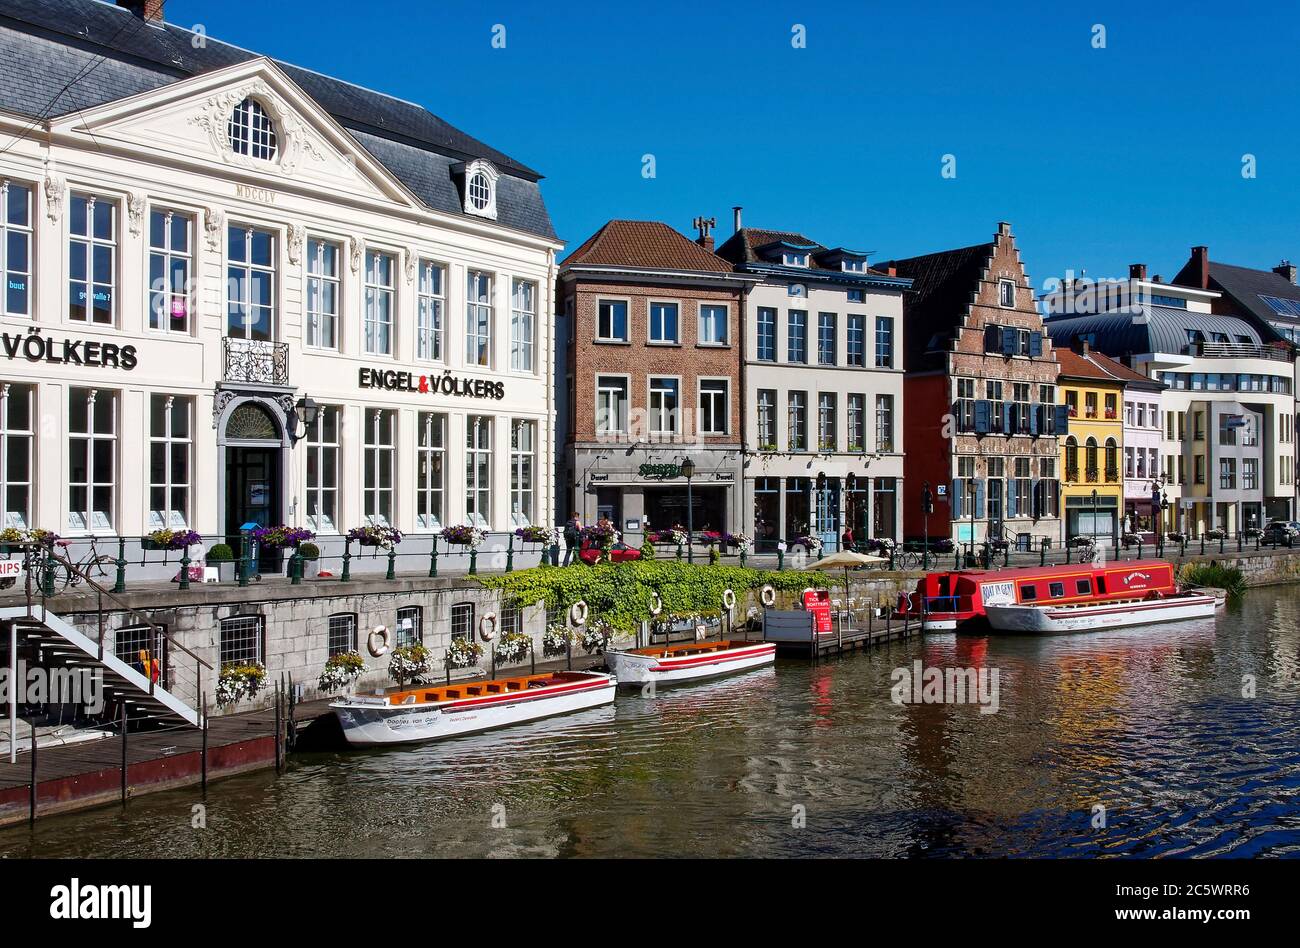 canal scene, water, one Flemish architecture building, others modernized, small boats, tour, flowers, Flanders, Europe, Ghent; Belgium Stock Photo